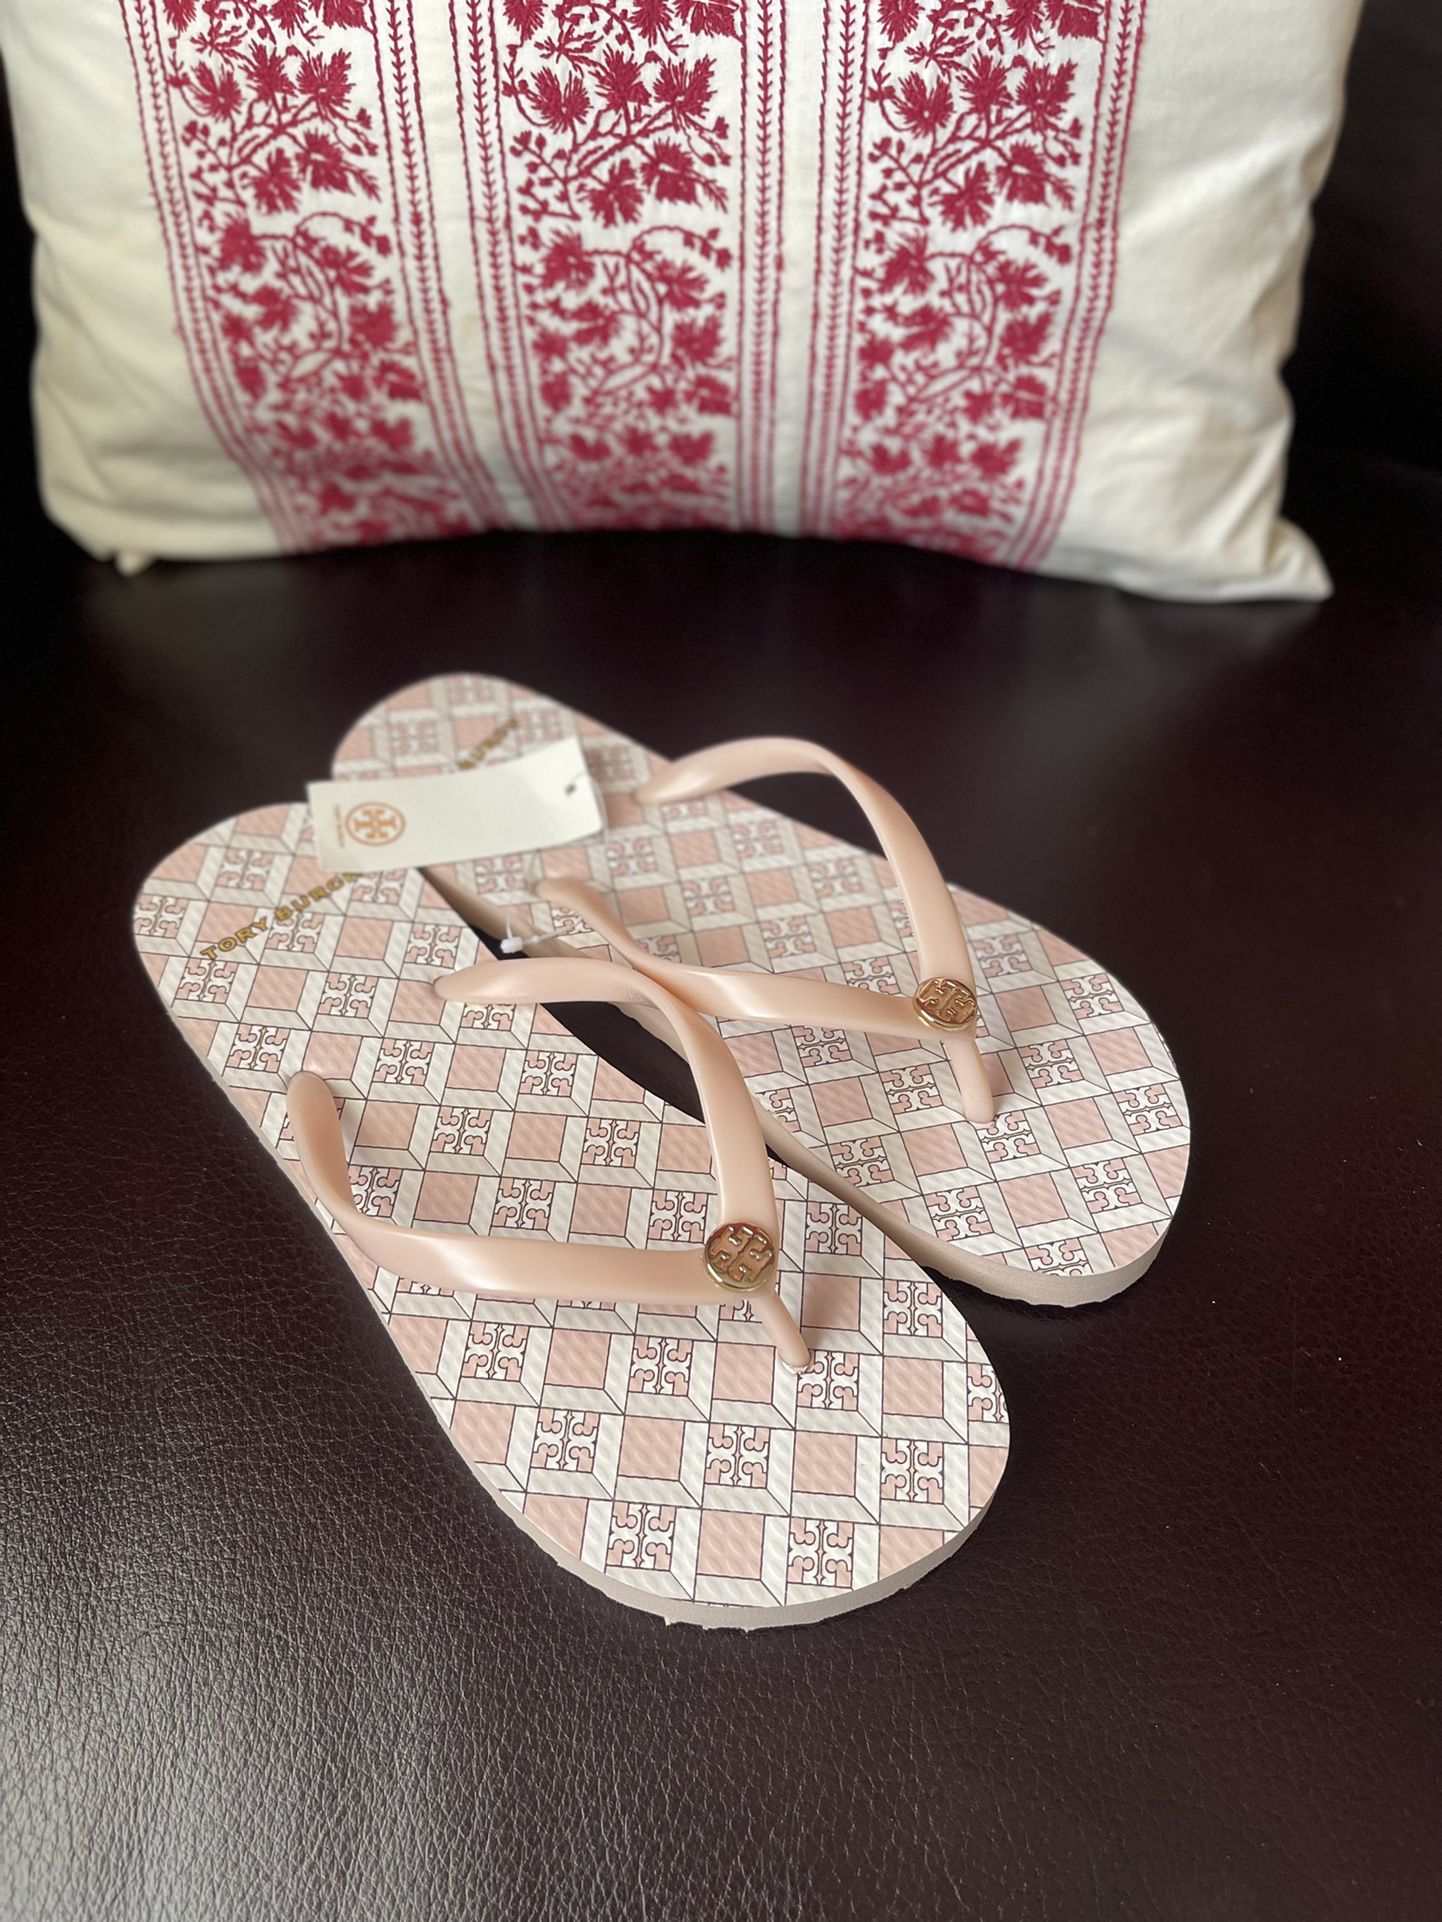 NWT Tory Burch Flip-Flops Women's Slippers size 8 in dusted blush/Geo logo  for Sale in Carlsbad, CA - OfferUp